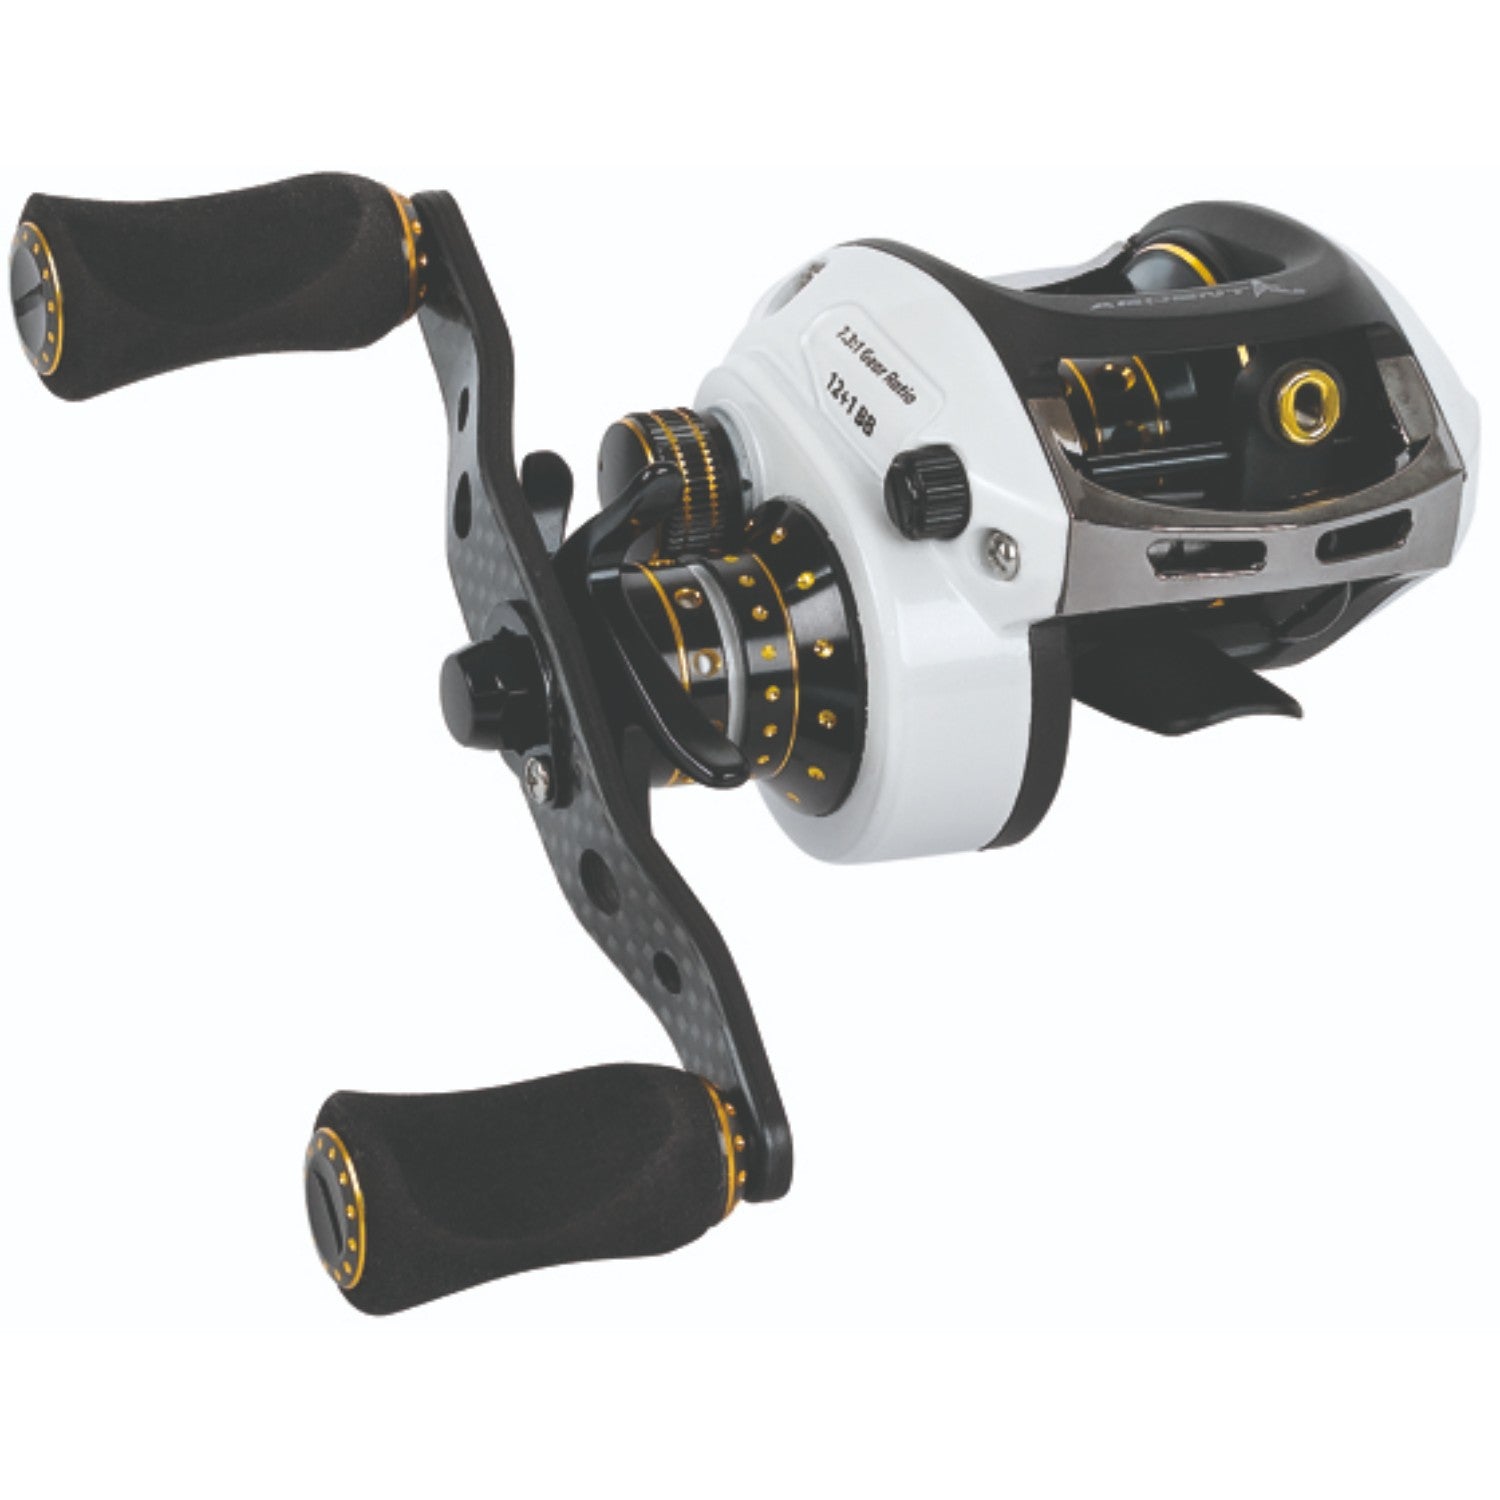 Ardent Bolt Spinning Reel 2000 – The Infidel Co